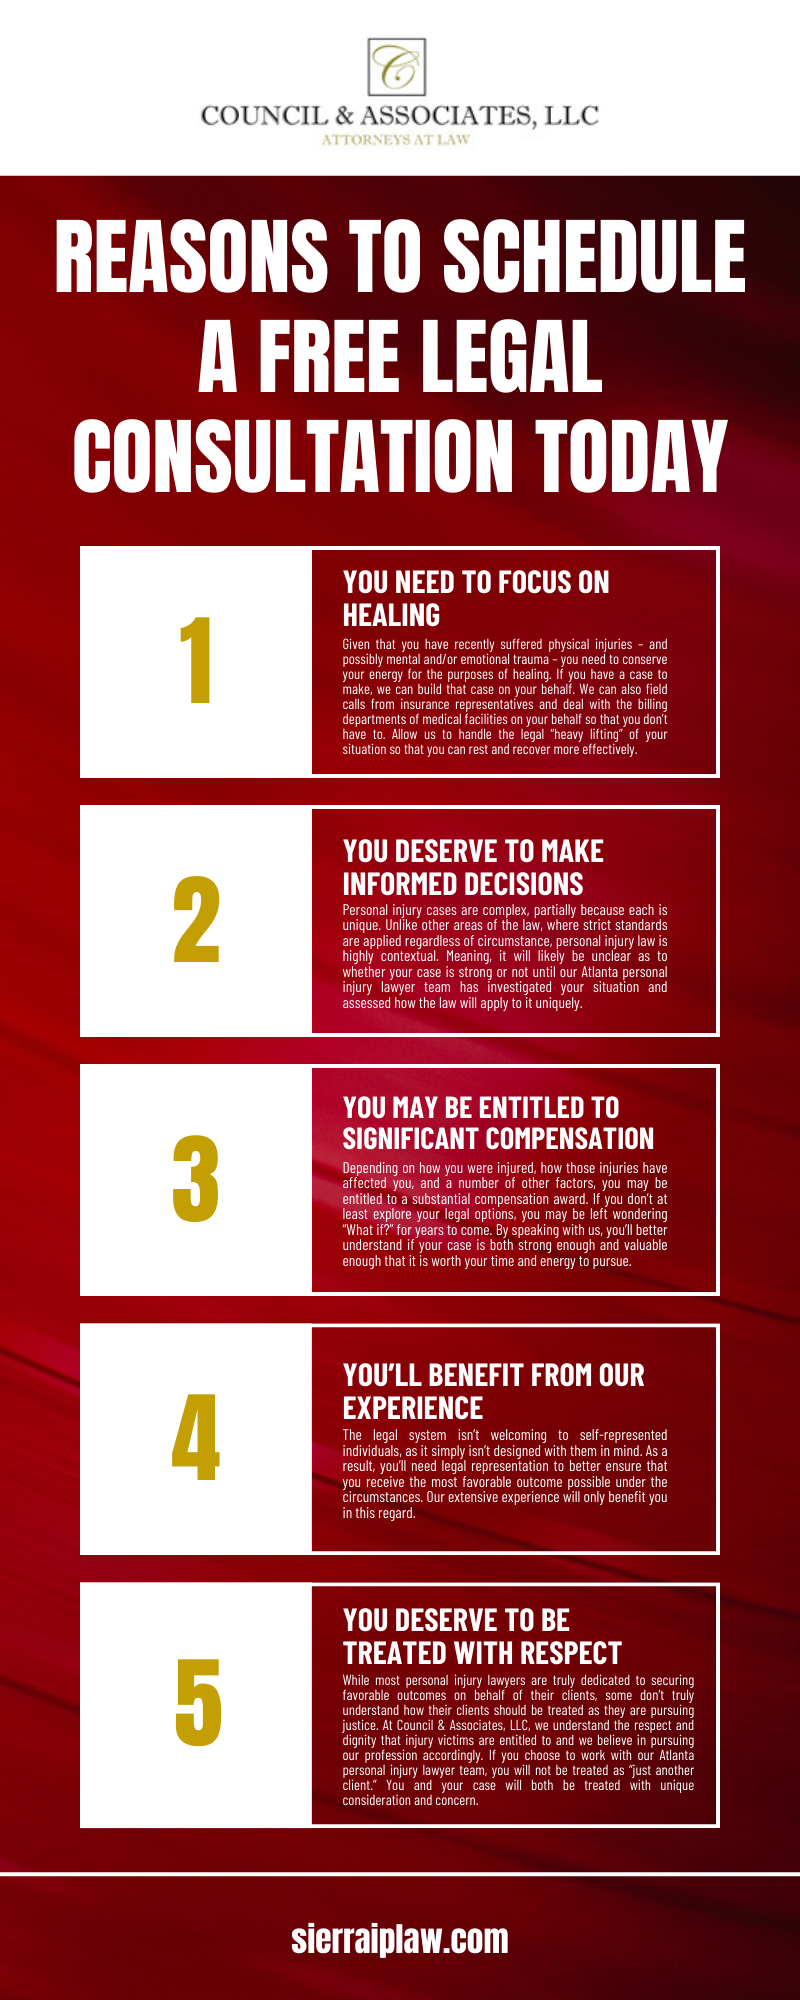 REASONS TO SCHEDULE A FREE LEGAL CONSULTATION TODAY INFOGRAPHIC